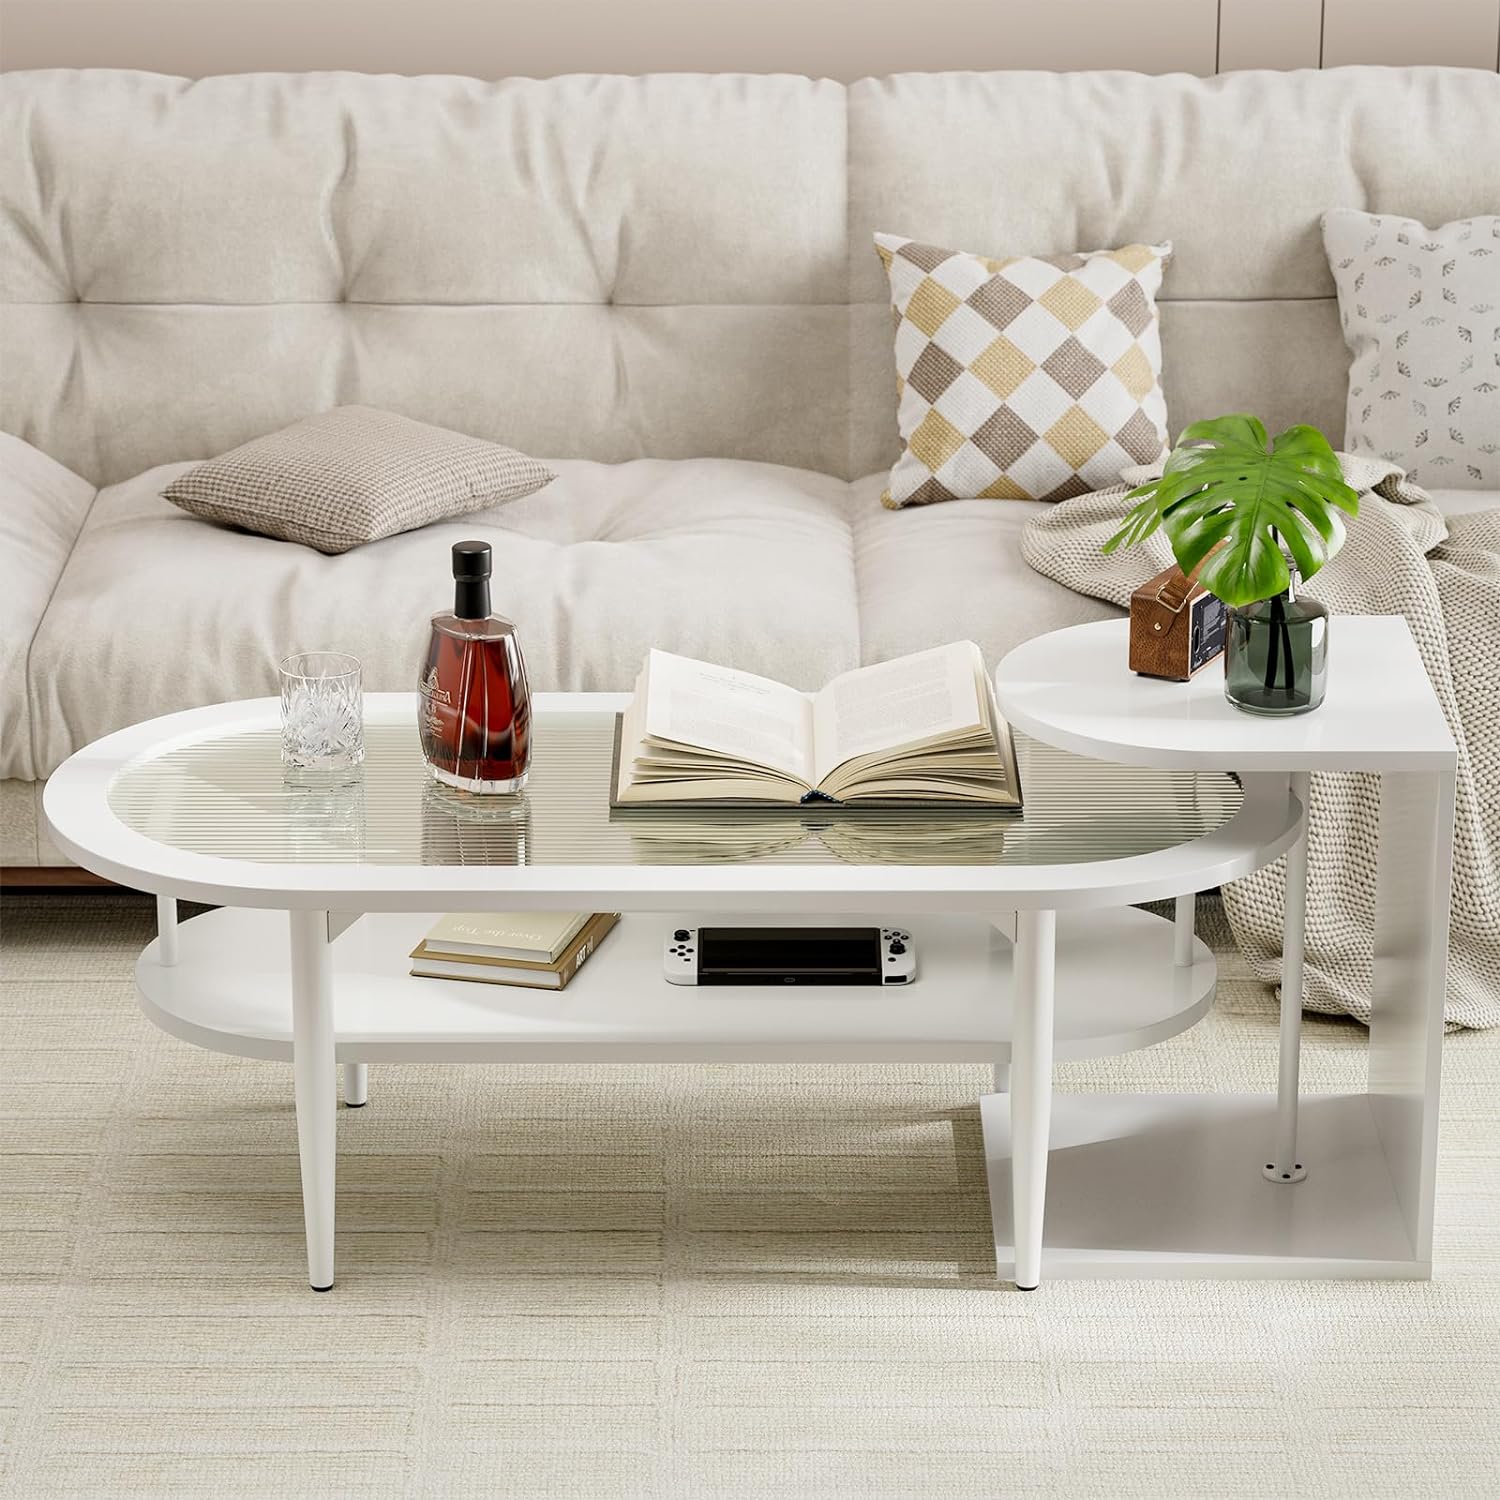 IKIFLY Glass Coffee Table Set, White Coffee Tea Table with Changhong Glass Table Top and Side Table for Living Room Dining Room